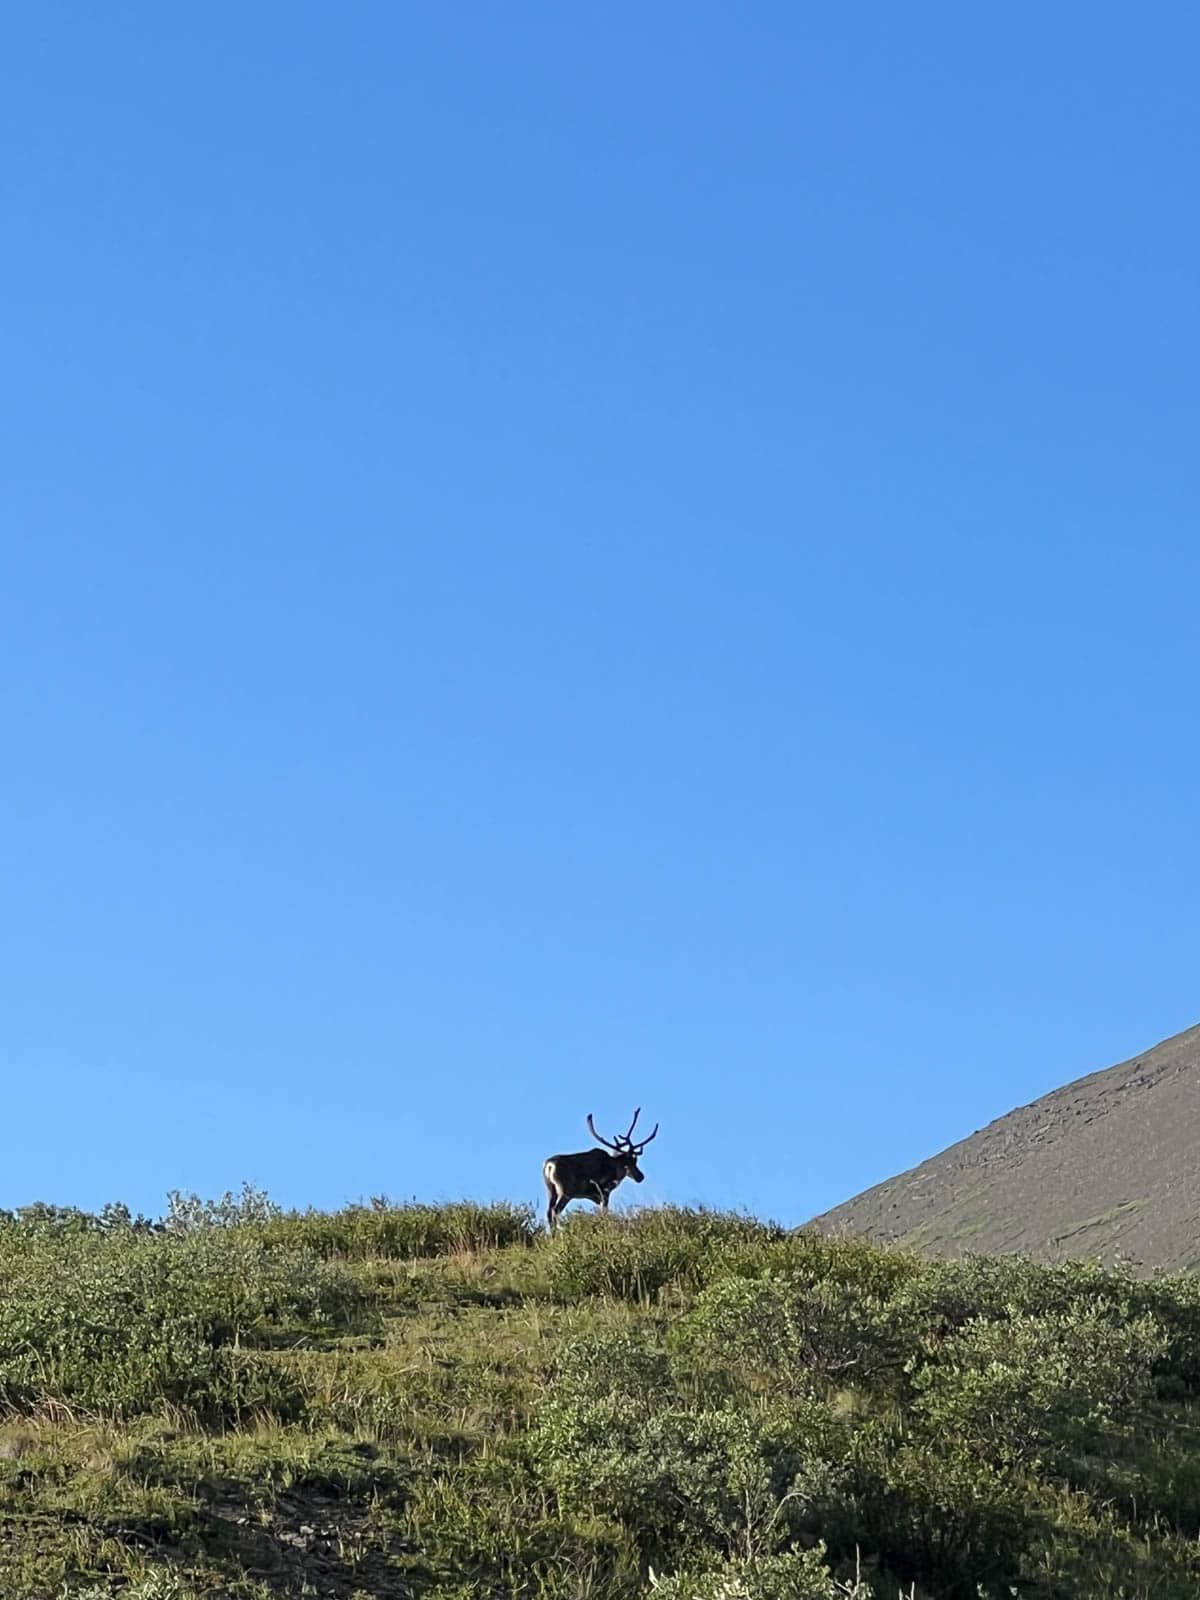 An image of an elk cresting a hill in Denali National Park.